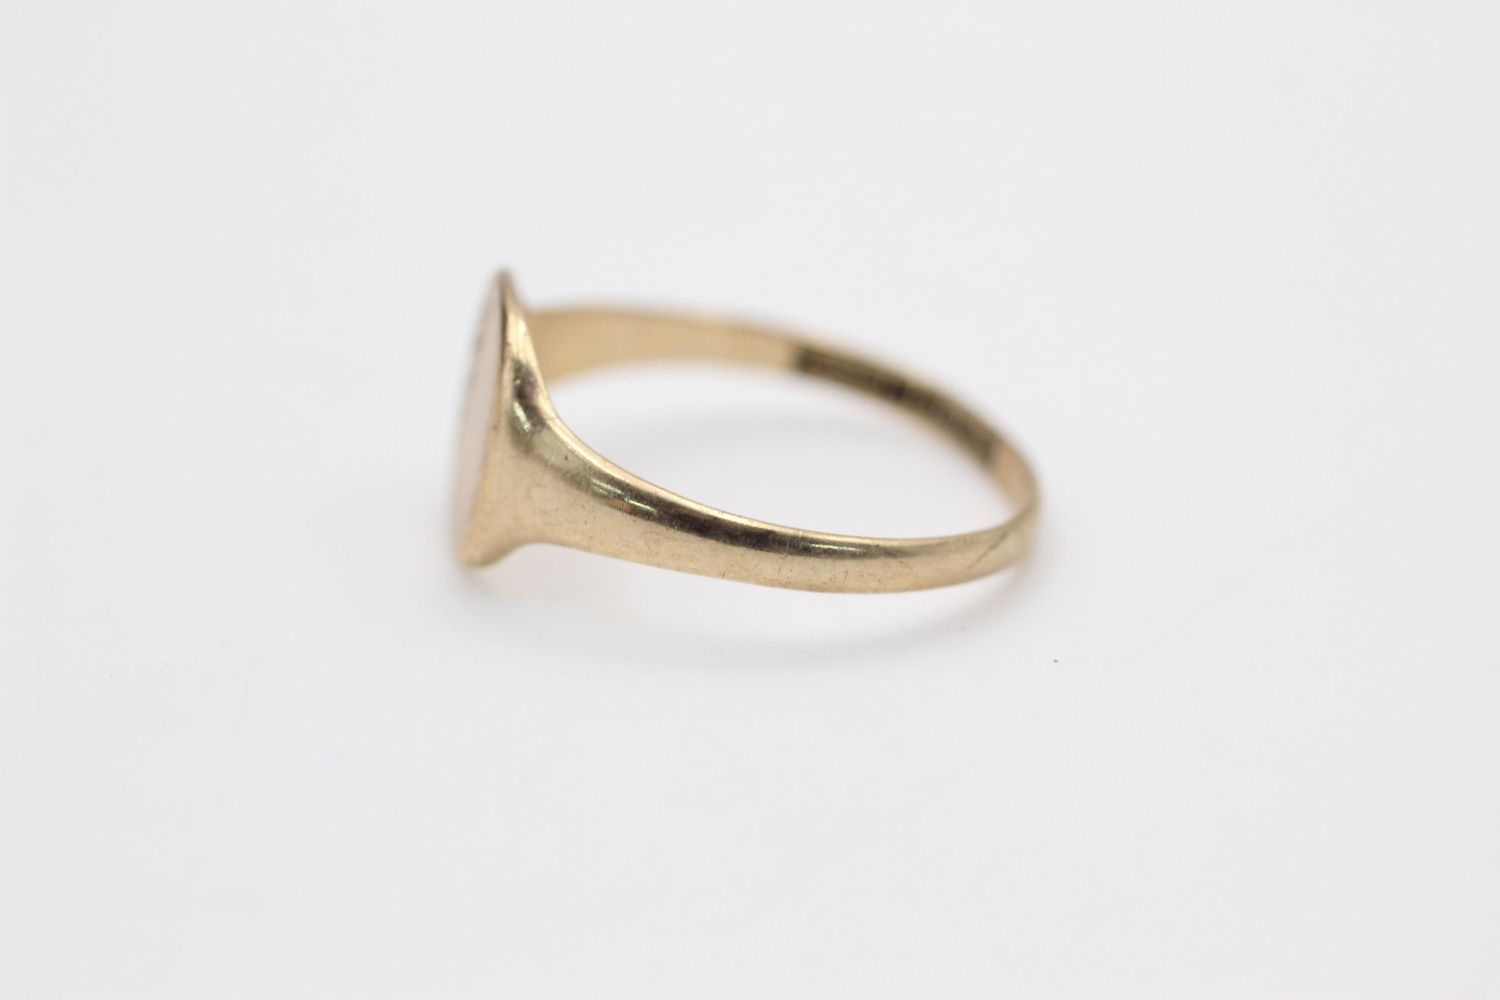 2 x 9ct gold signet rings 3 grams gross - Image 3 of 5